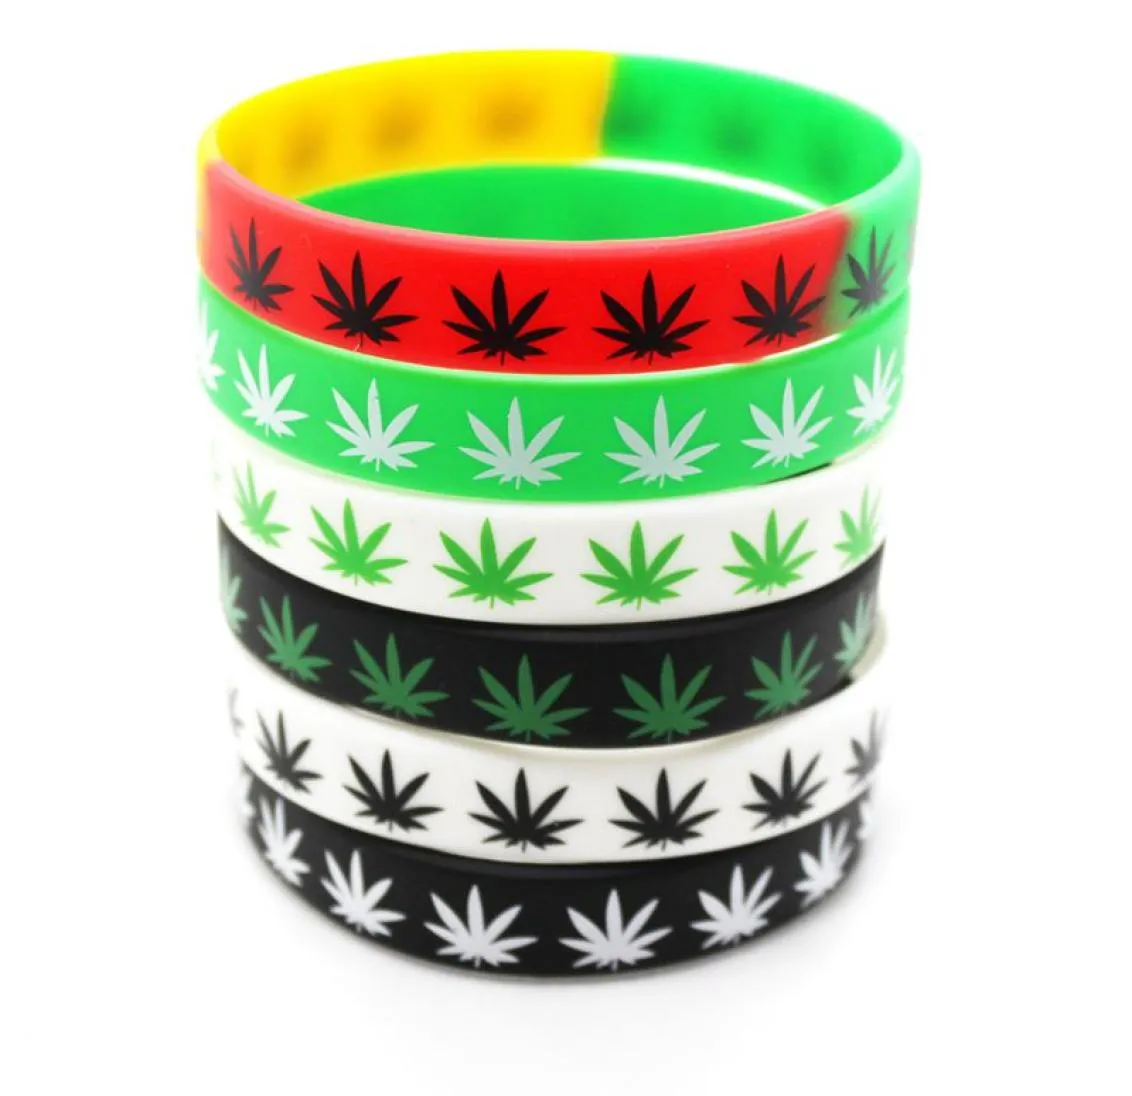 Hot Sale! 50pcs/lot Multi Color Jamaica Bracelet, Cssic Printed Hip Hop Silicone Wristband, Promotion Gift, Silicon Wristband7812709